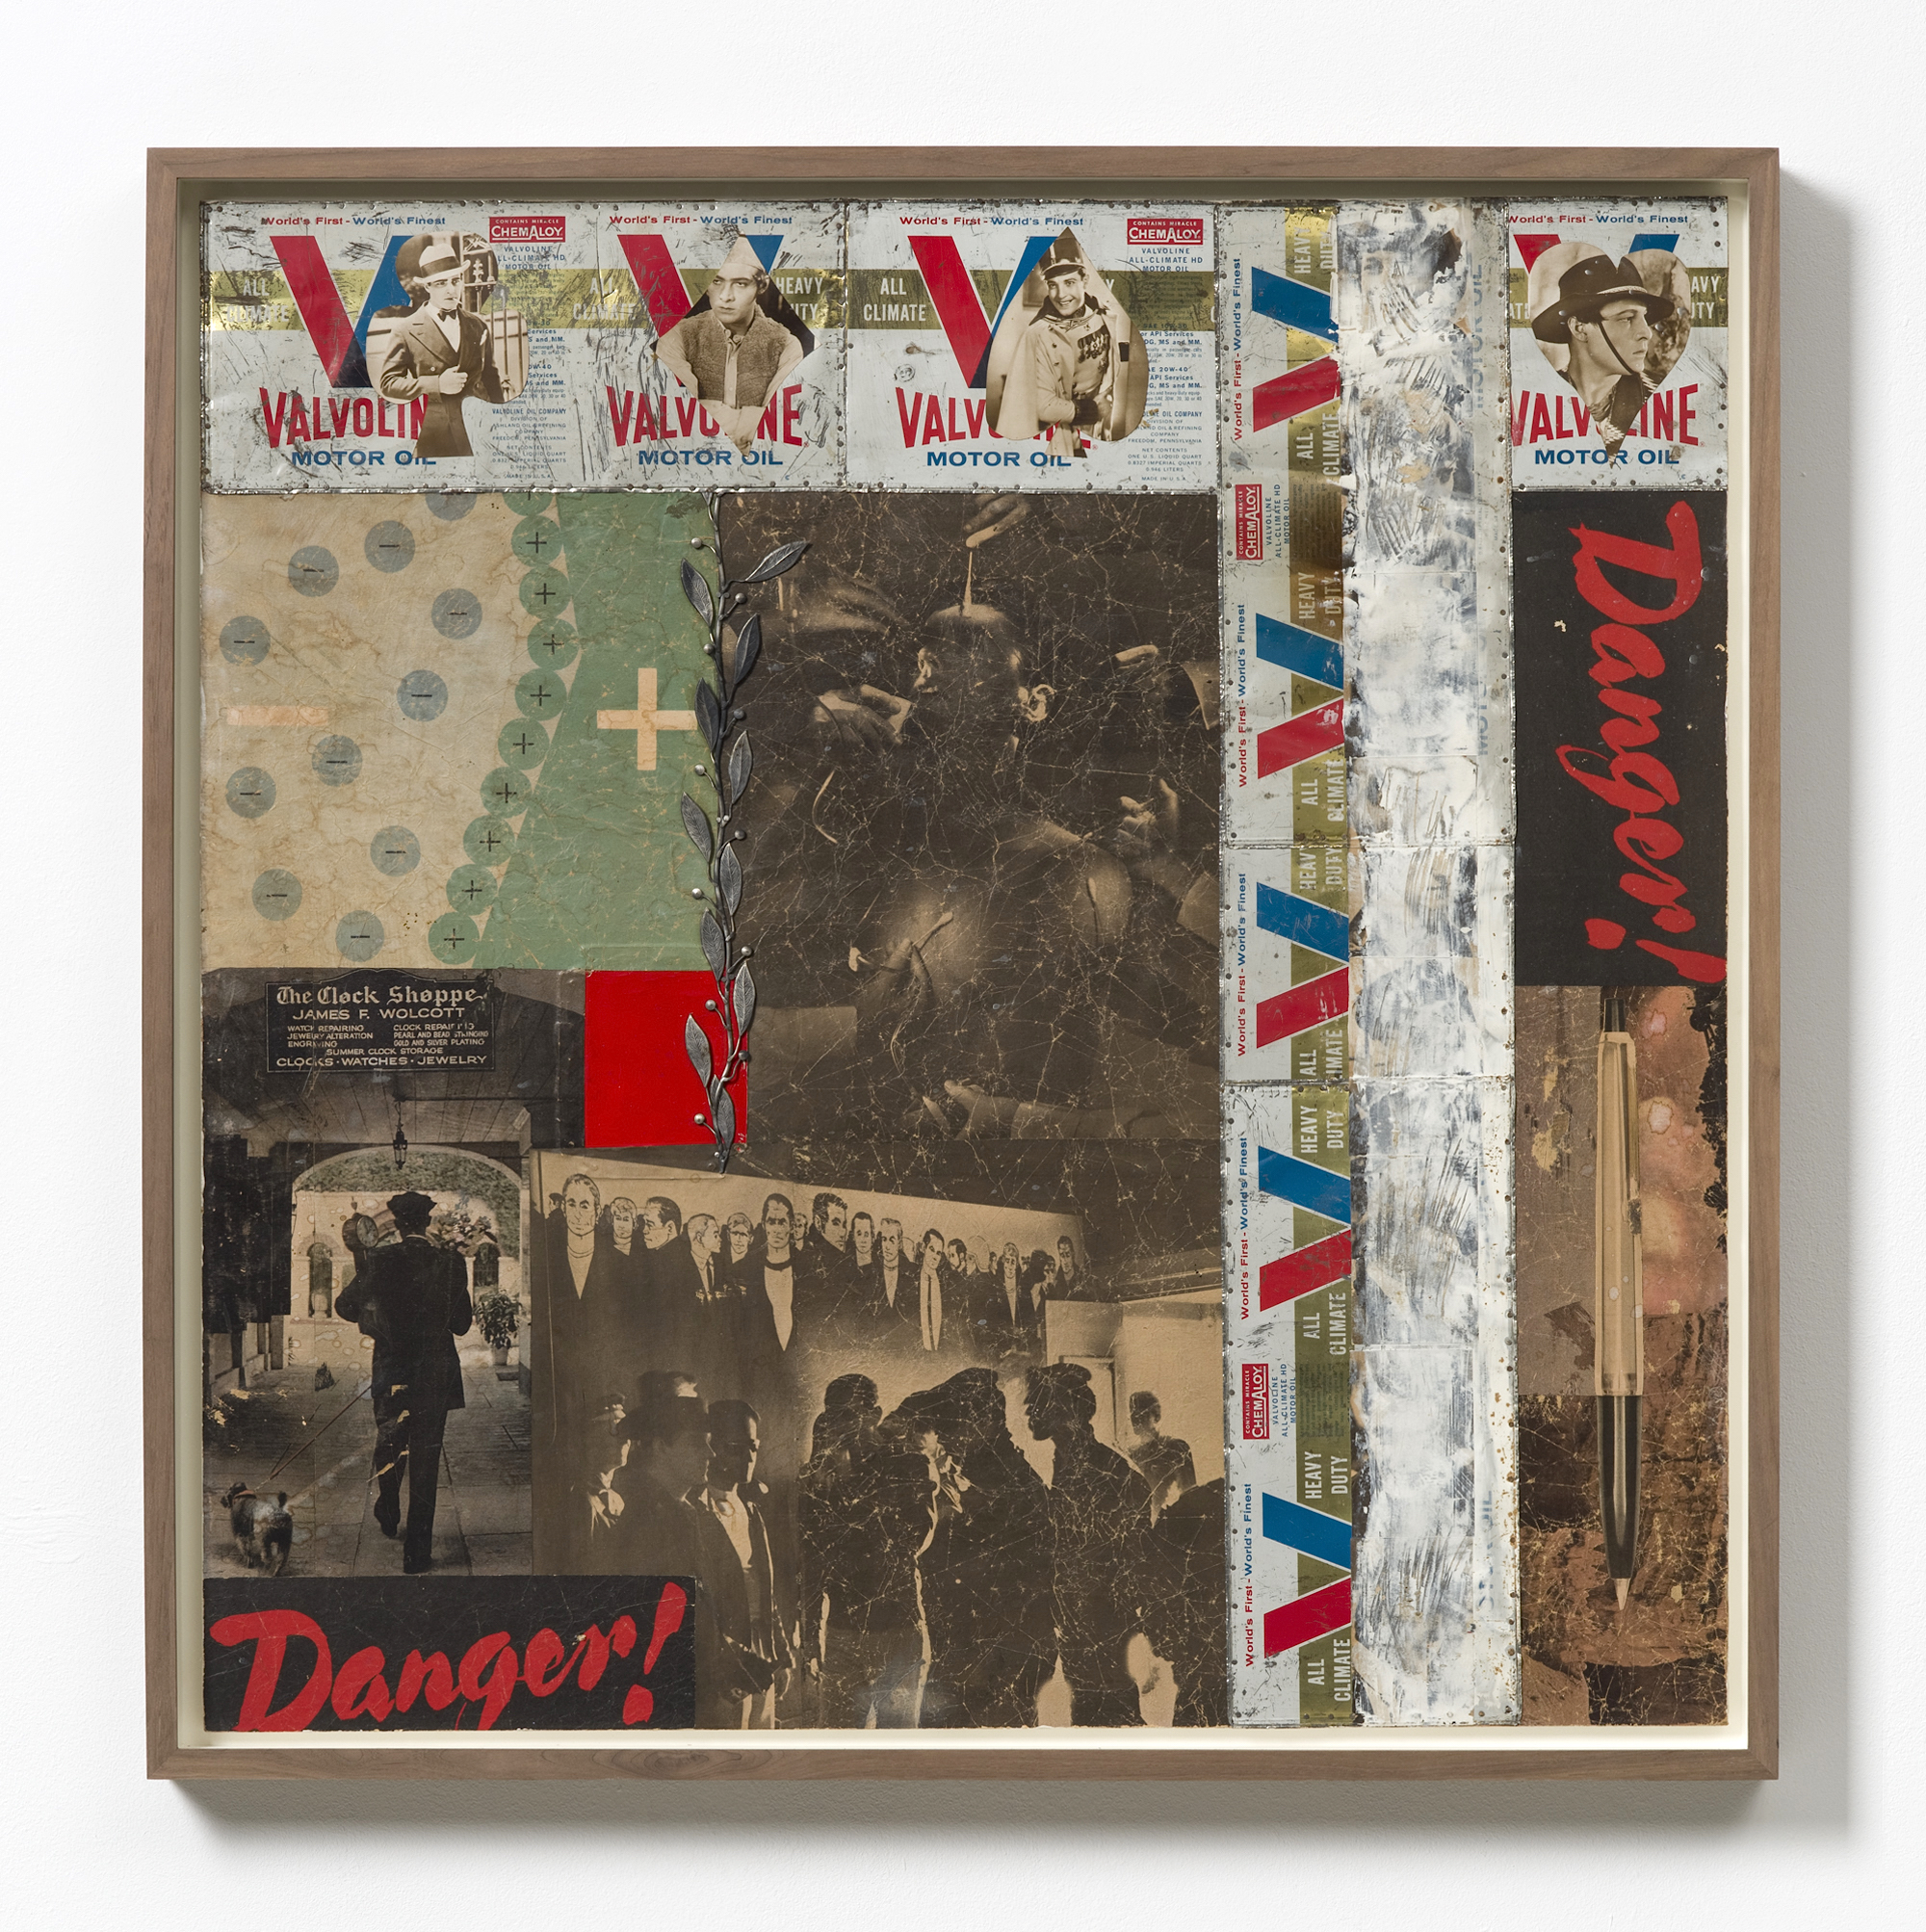 Enough, printed material, printed photographs, print on metal, metal object, paint on plywood, 75 x 75 cm, 1965